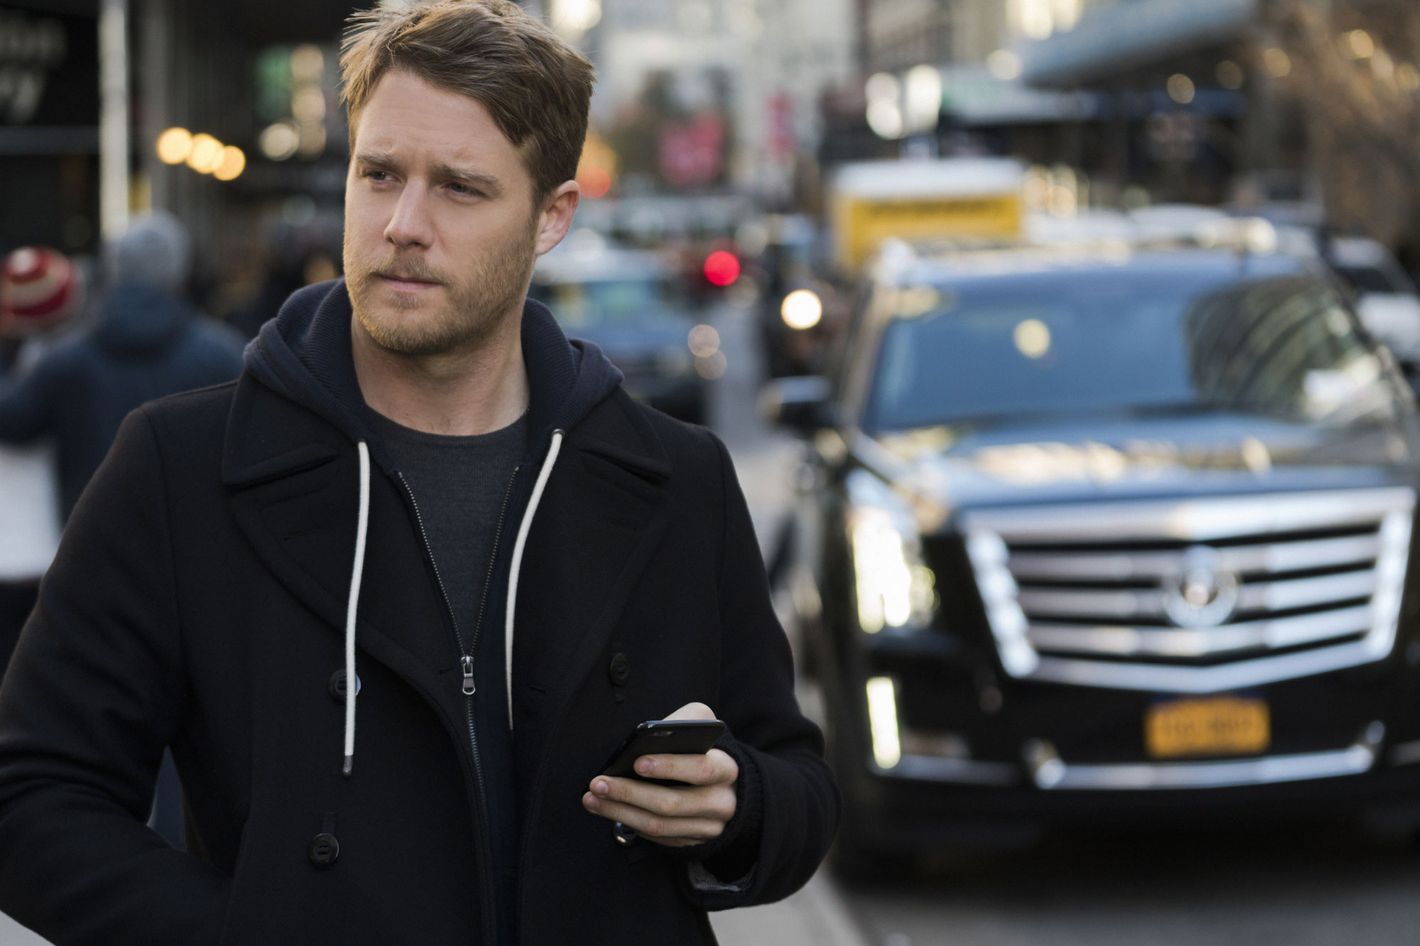 Clatto Verata » Bradley Cooper Is High On Life in 'Limitless' - The Blog of  the Dead